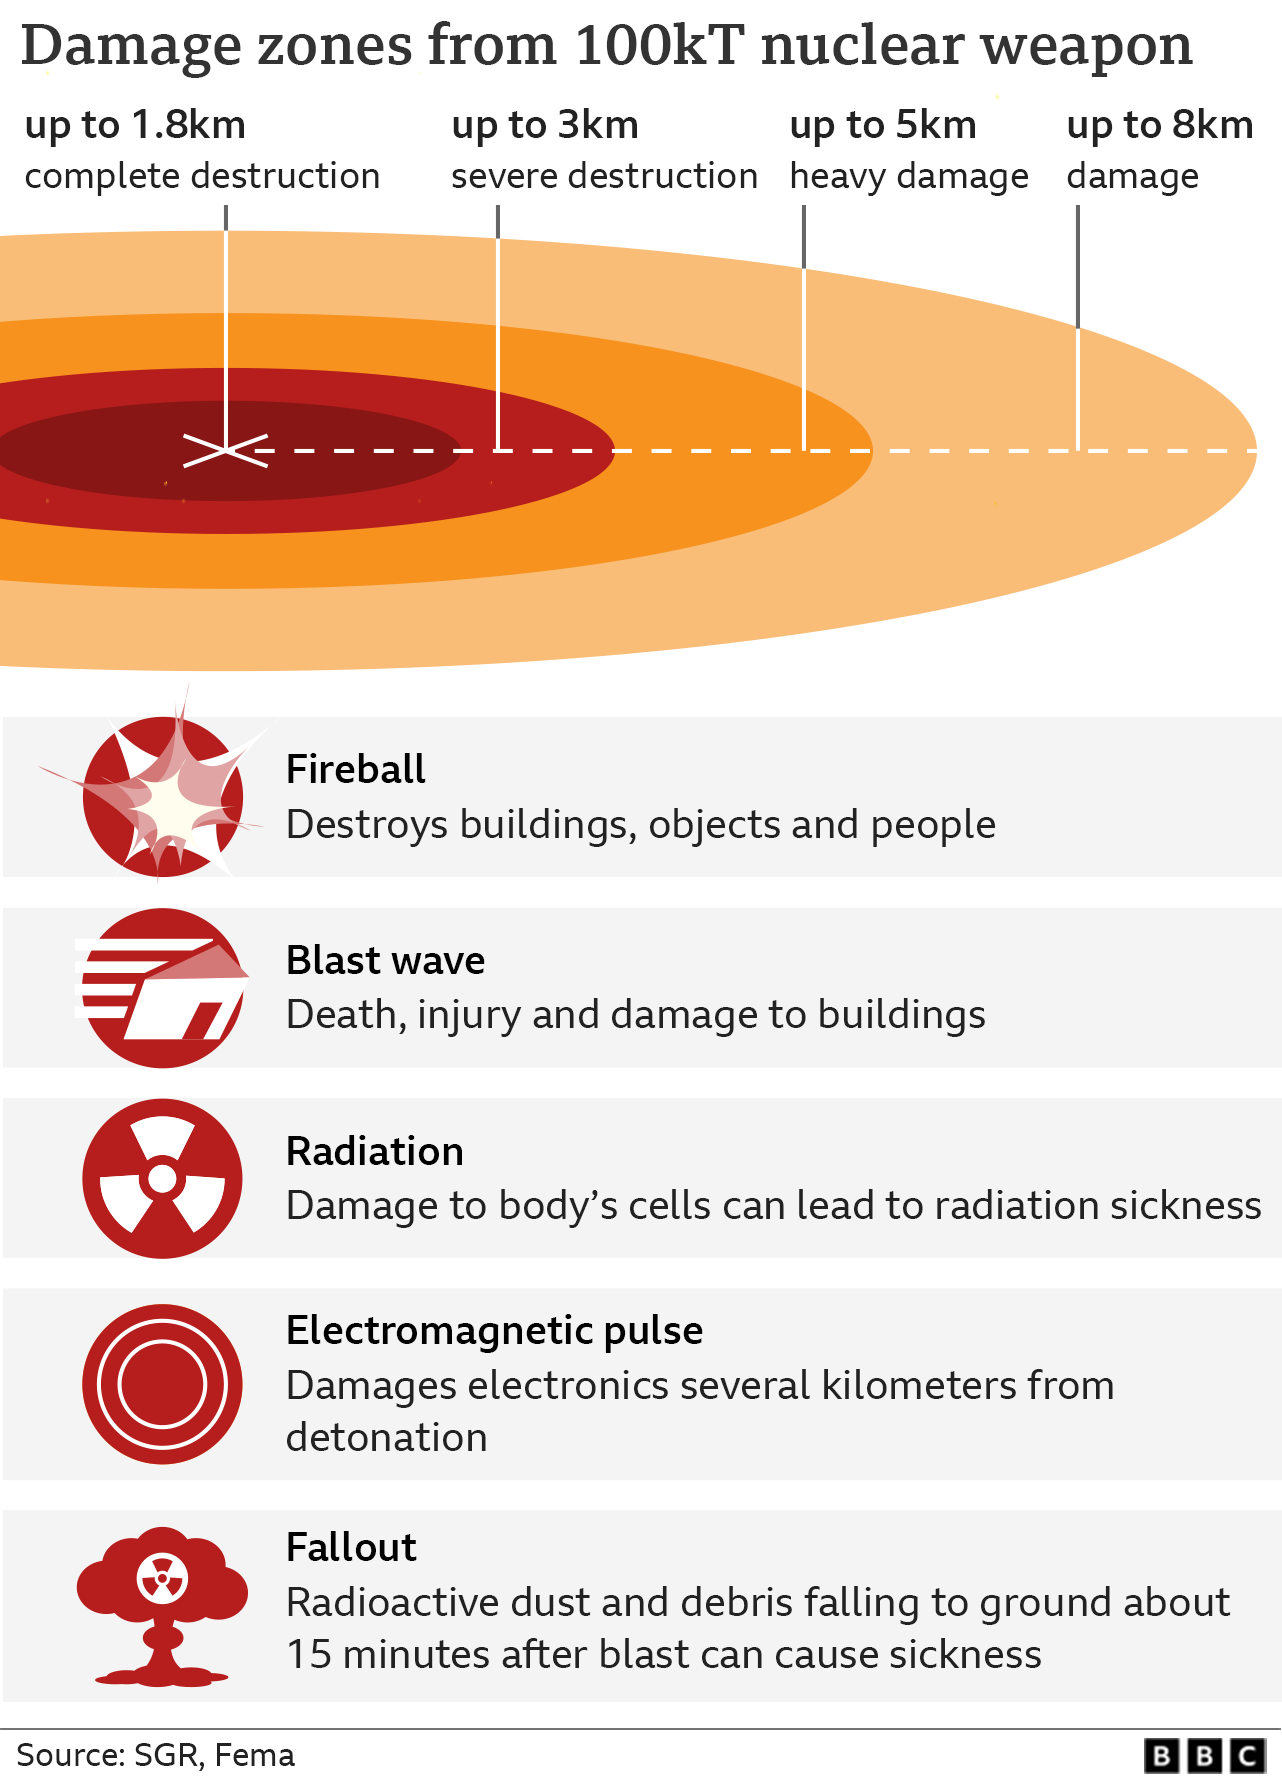 Graphic showing damage zones from nuclear blast